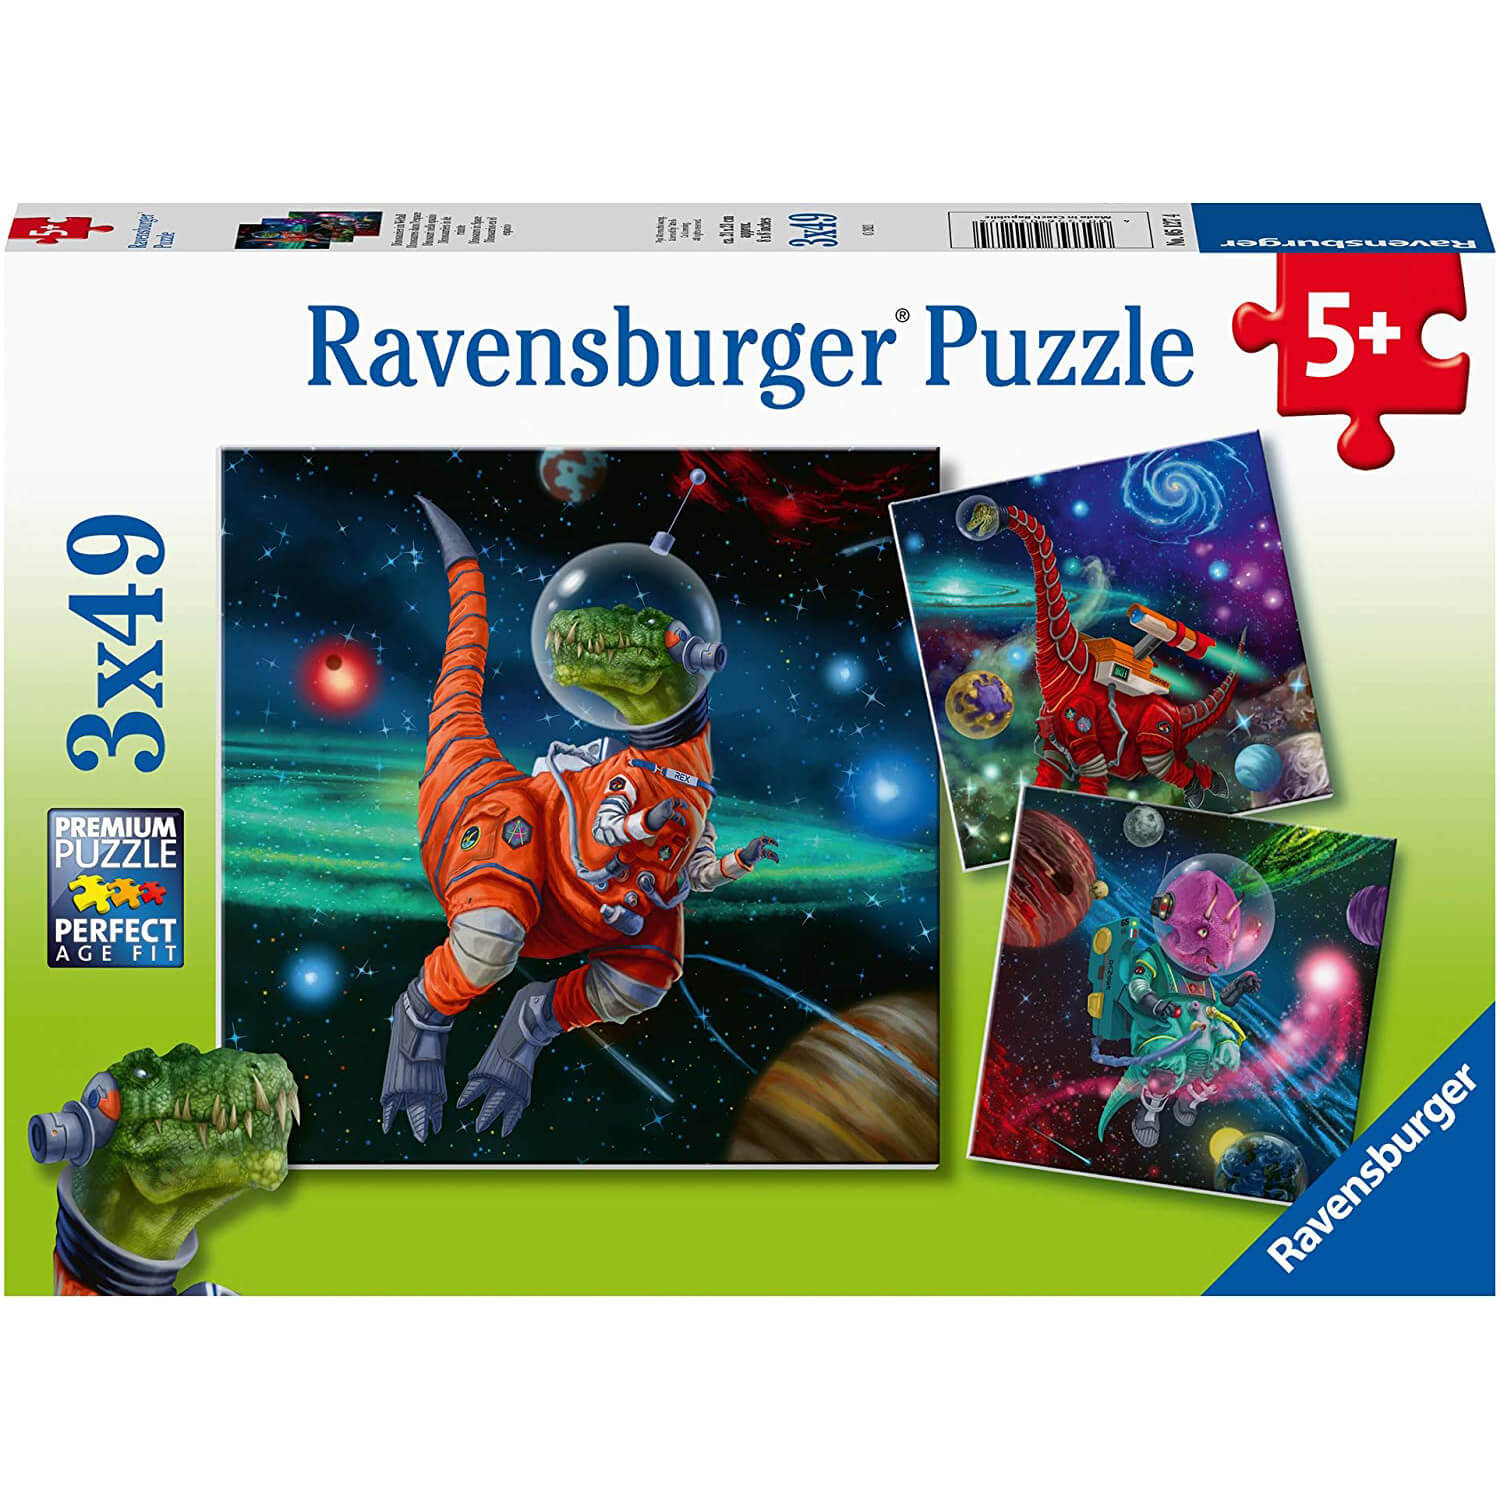 Ravensburger Dinosaurs in Space 3 x 49 Piece Puzzle